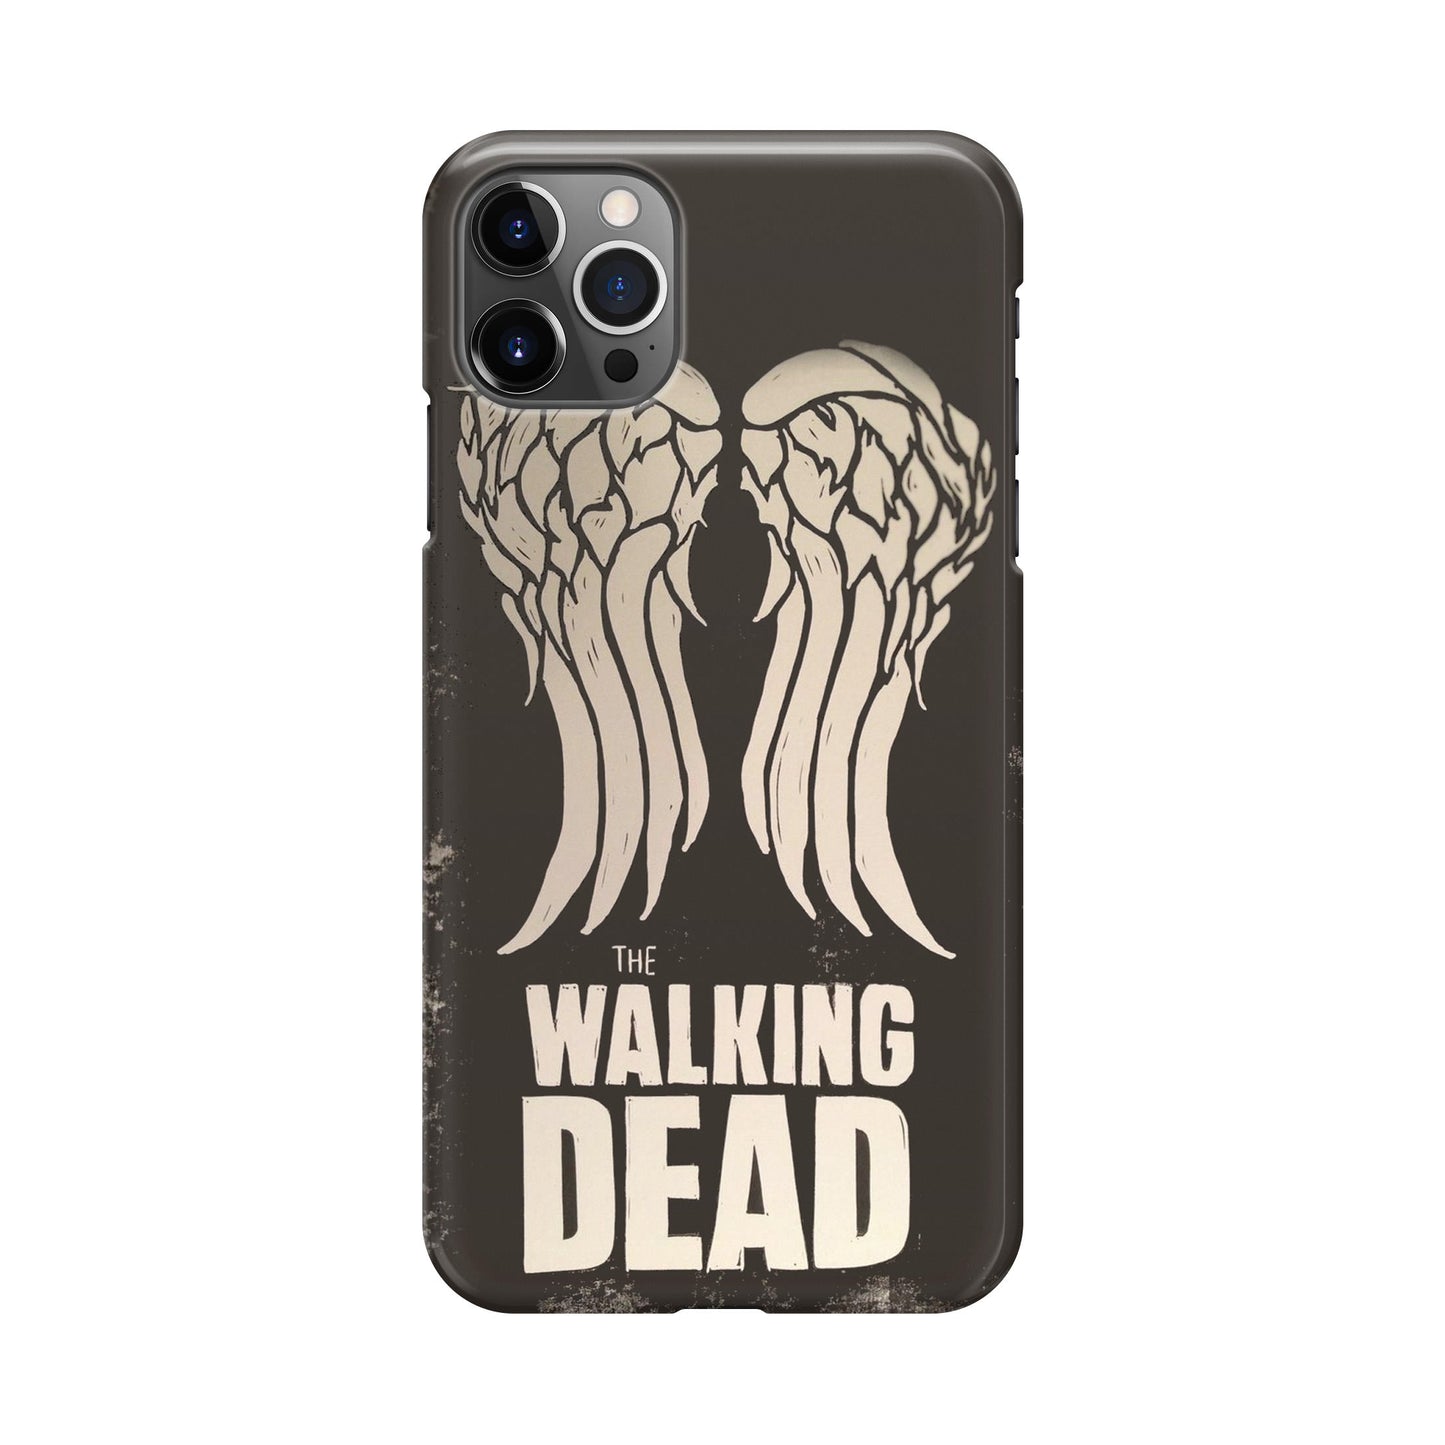 The Walking Dead Daryl Dixon Wings iPhone 12 Pro Max Case